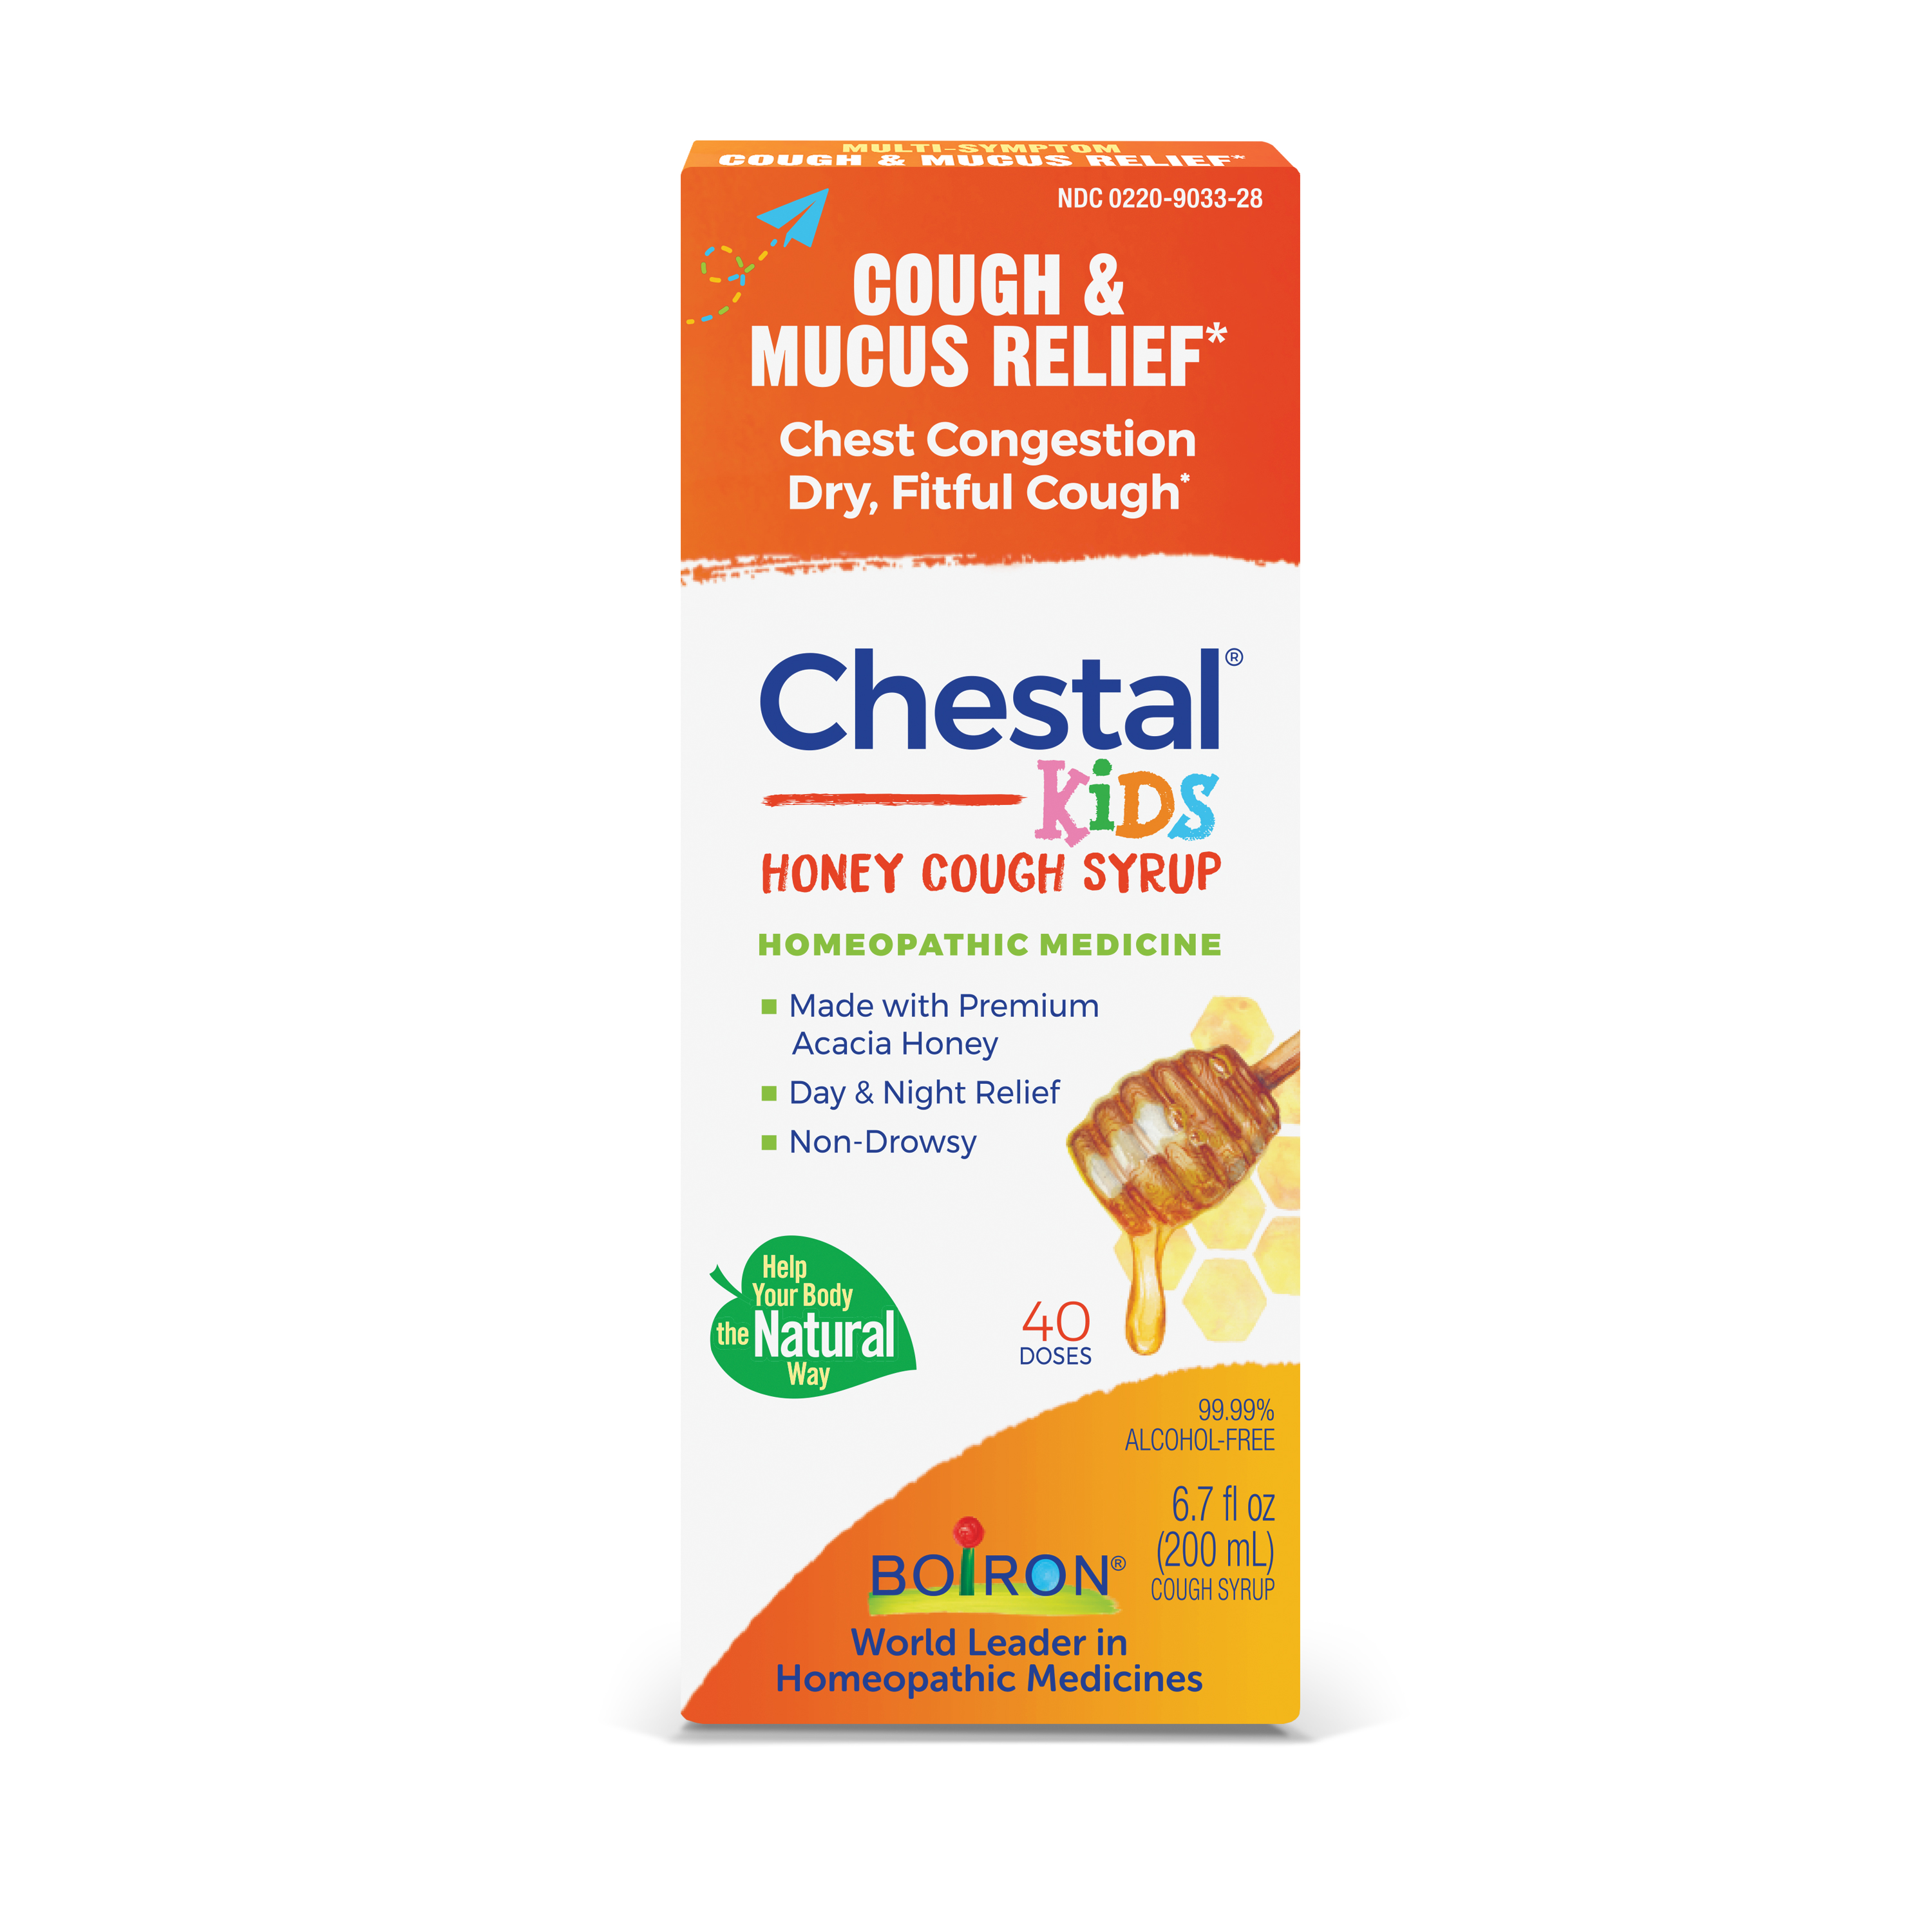 Boiron Chestal Kids Cough Syrup , Homeopathic Medicine for Cold & Cough Relief, Multi-Symptom Formula, Nasal & Chest Congestion, Runny Nose, 6.7 fl oz - image 1 of 8